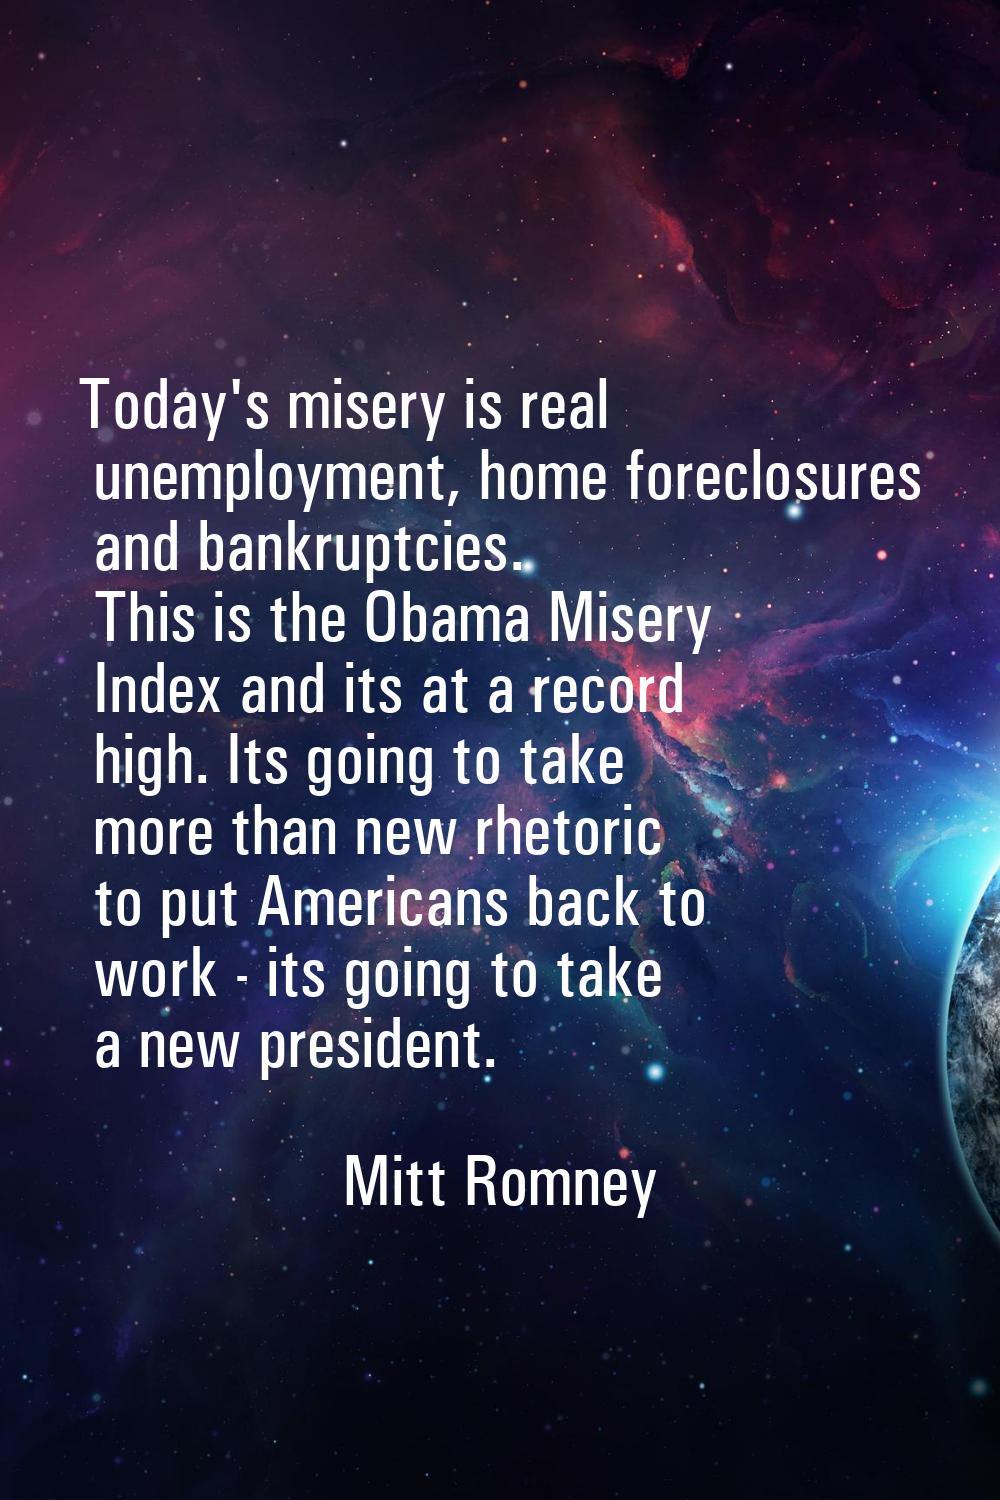 Today's misery is real unemployment, home foreclosures and bankruptcies. This is the Obama Misery I